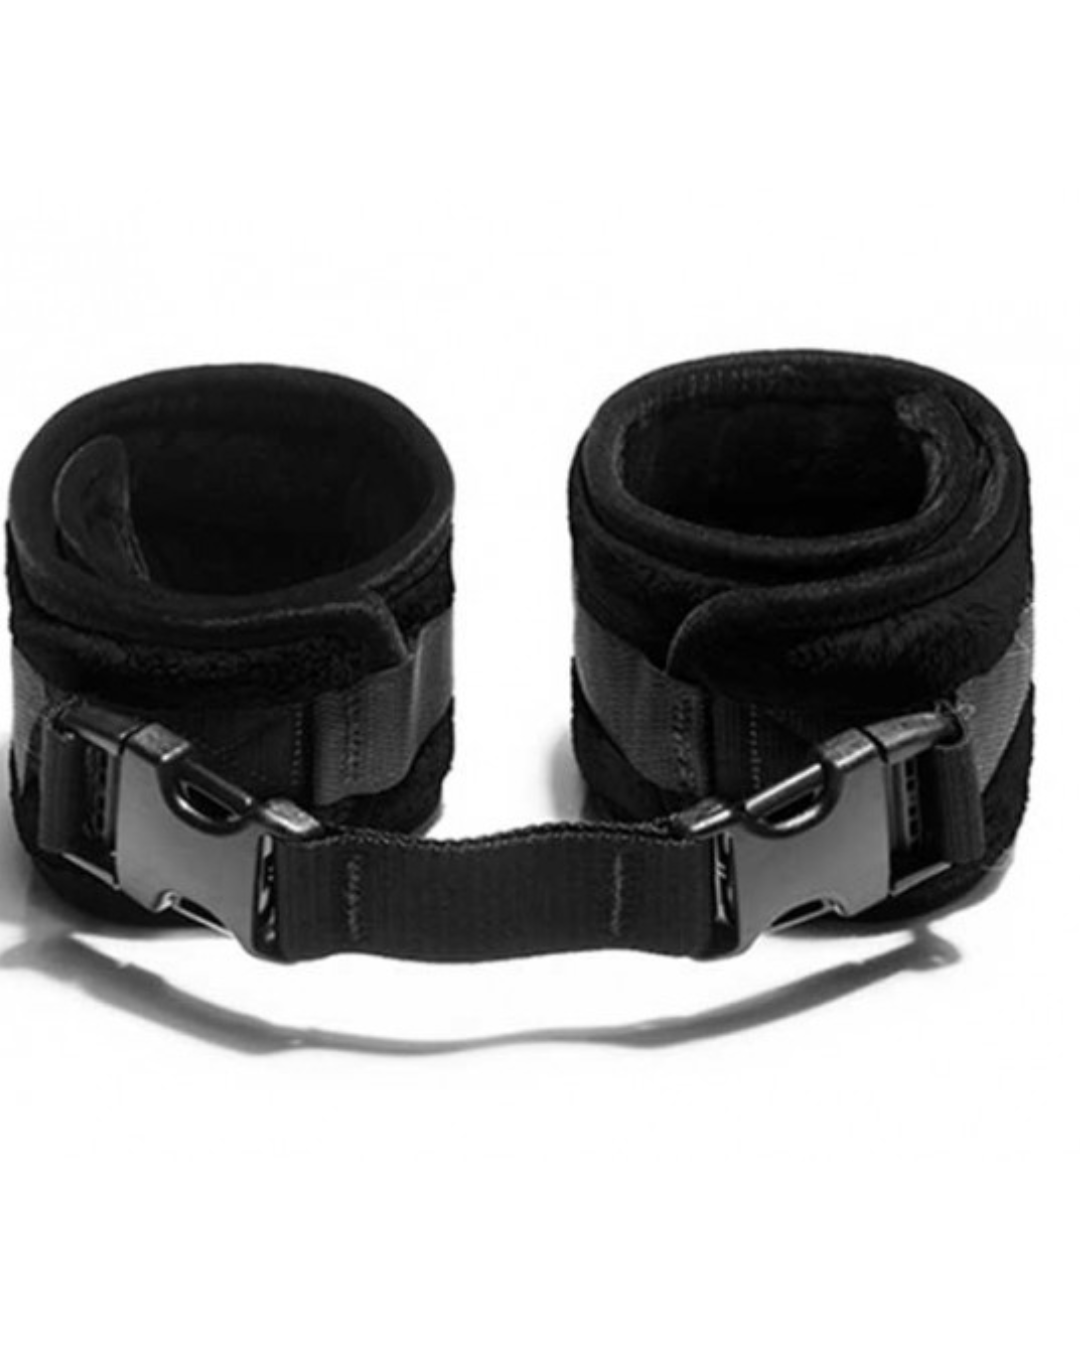 Liberator Cuff Kit for D-Ring Products cuffs only